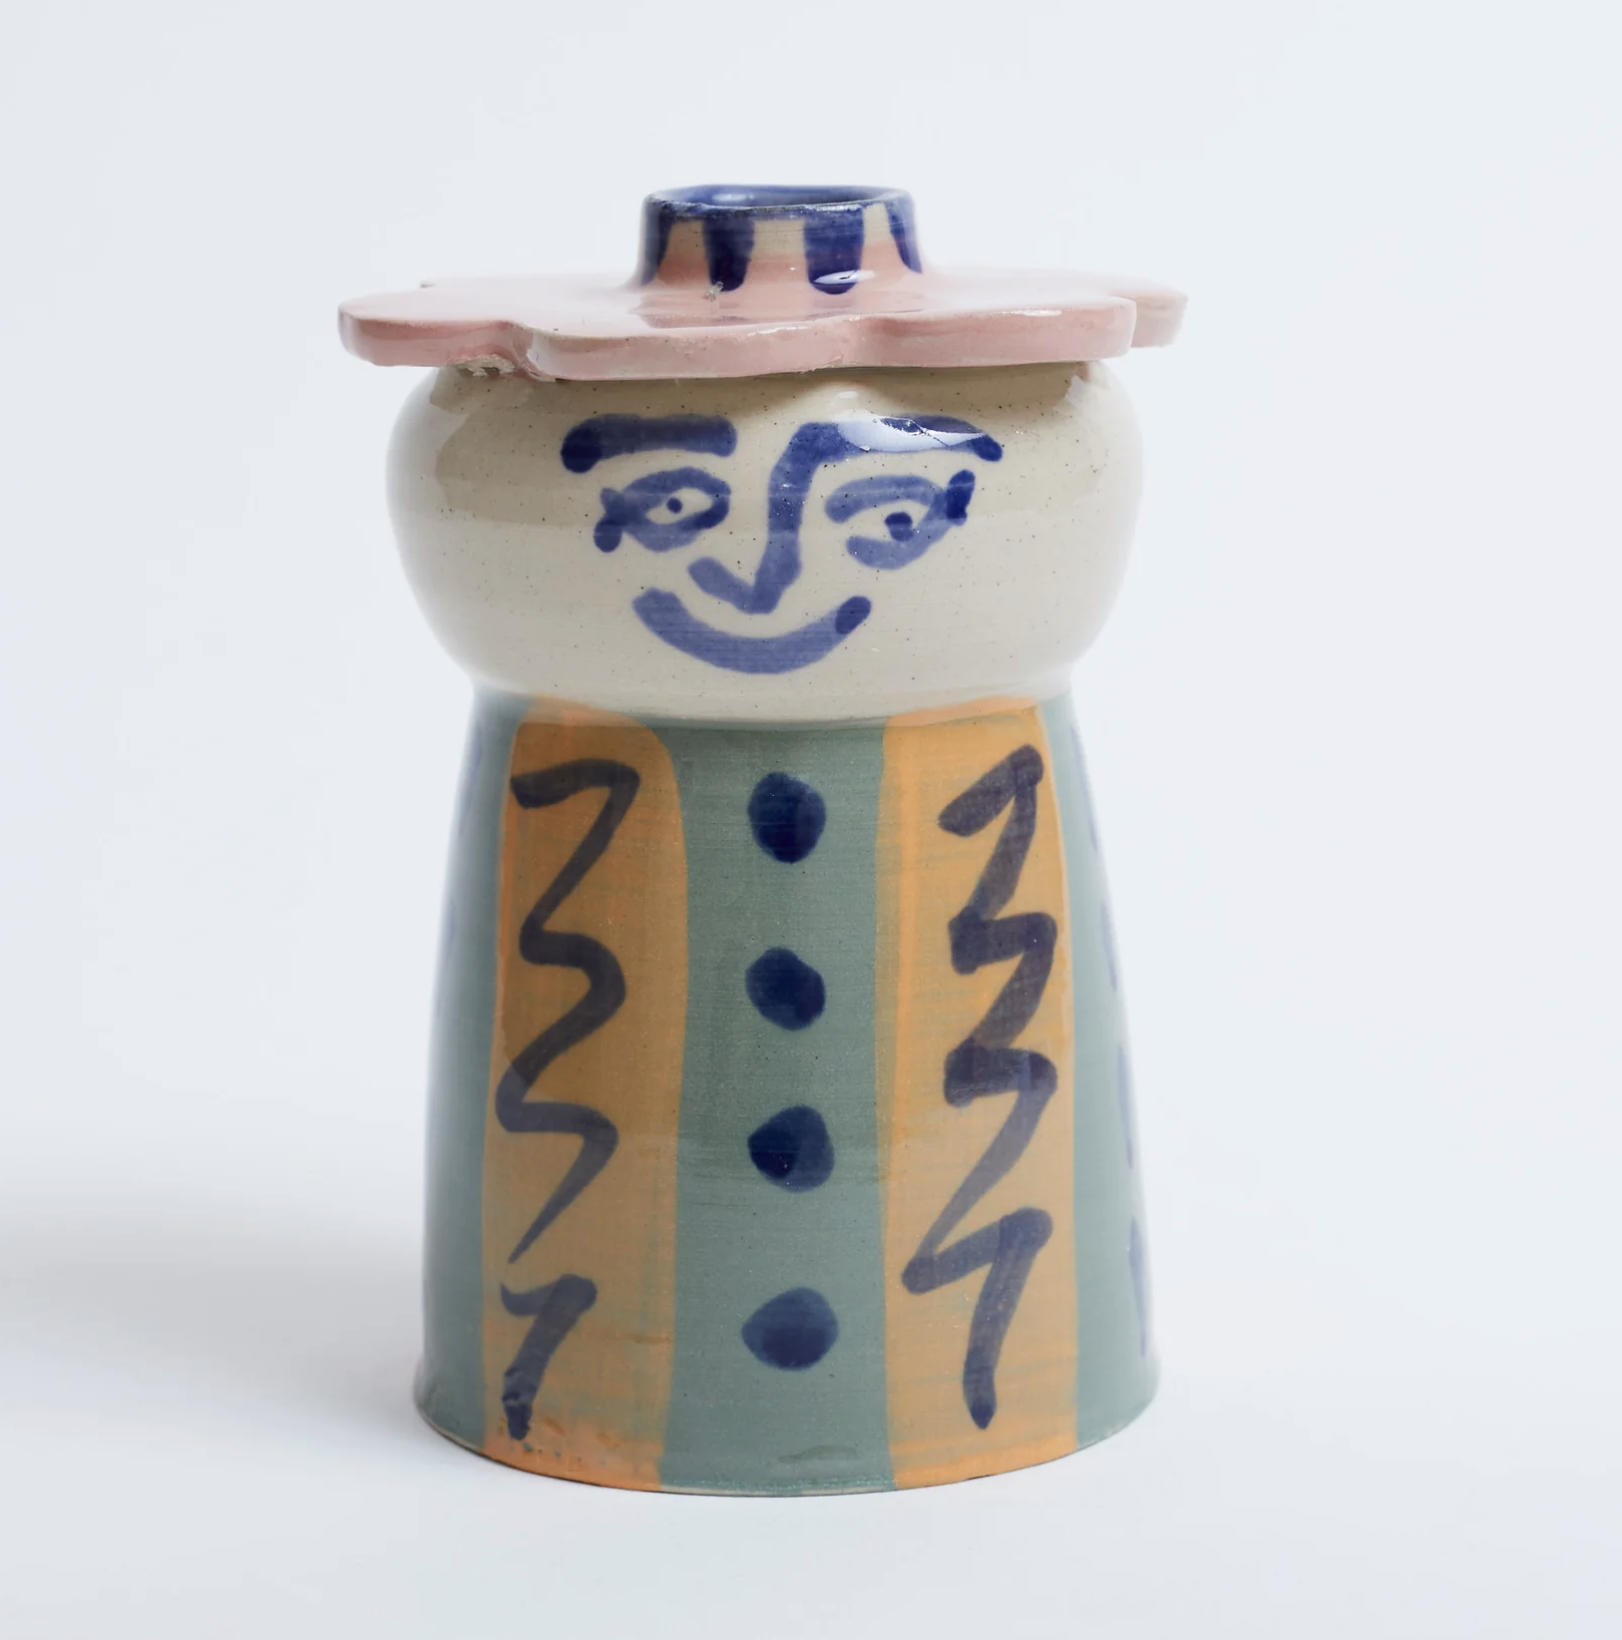 Sciacca Virdi Candle Holder - K S Creative Pottery, £50